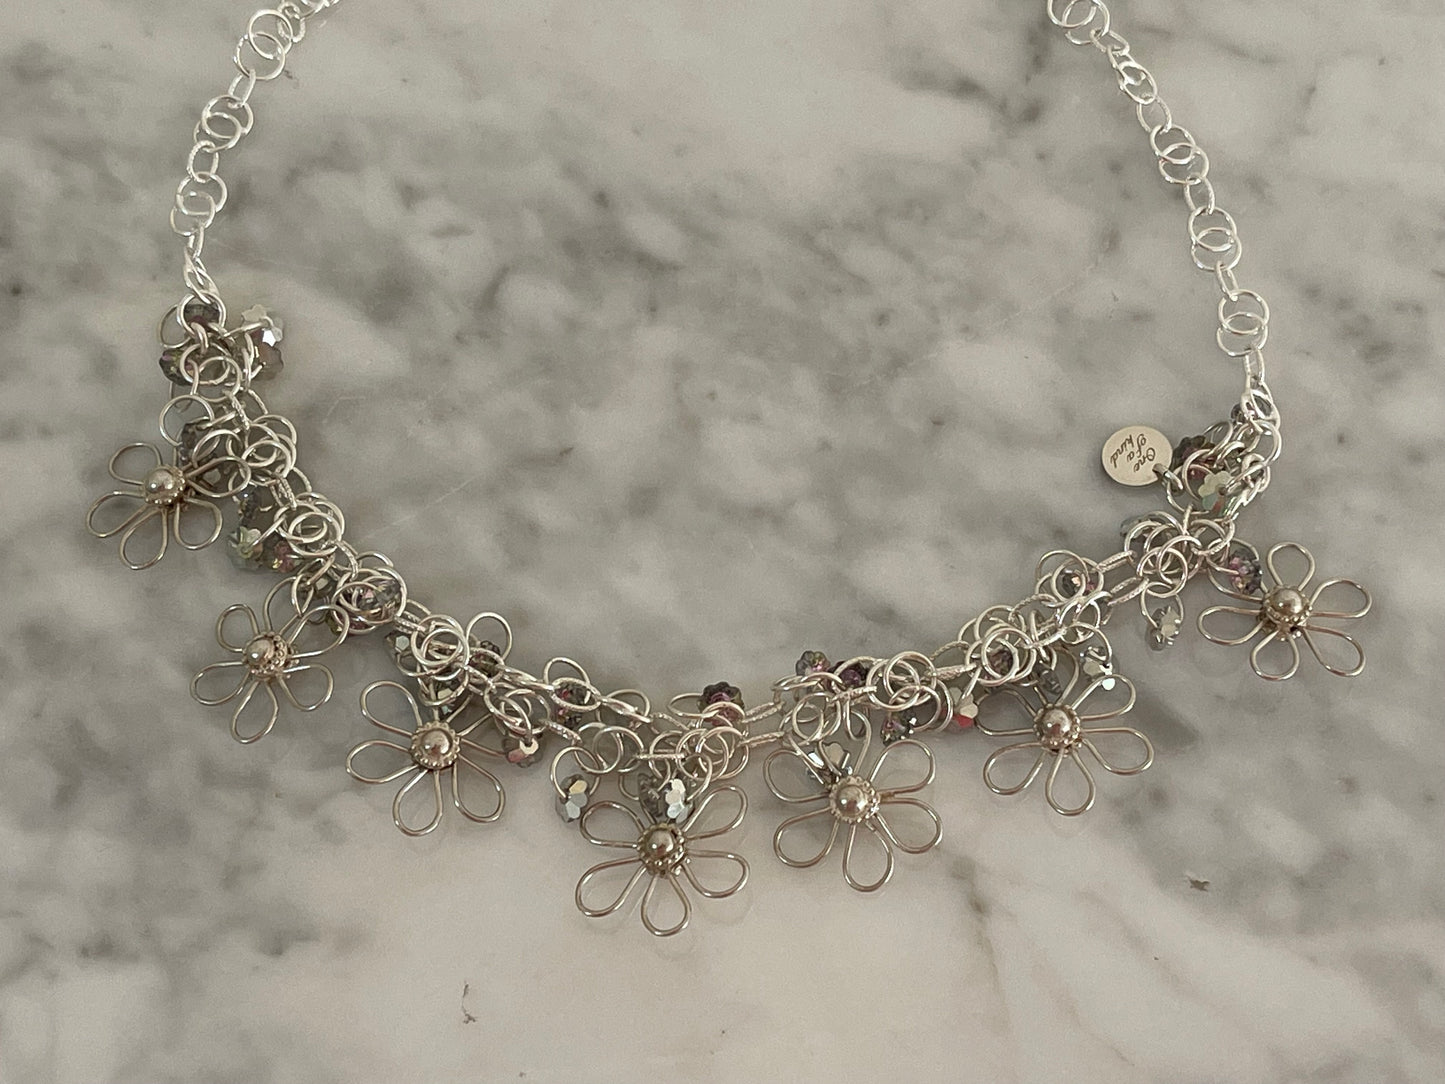 Handmade Flower Necklace in Sterling Silver with Swarovski Crystal